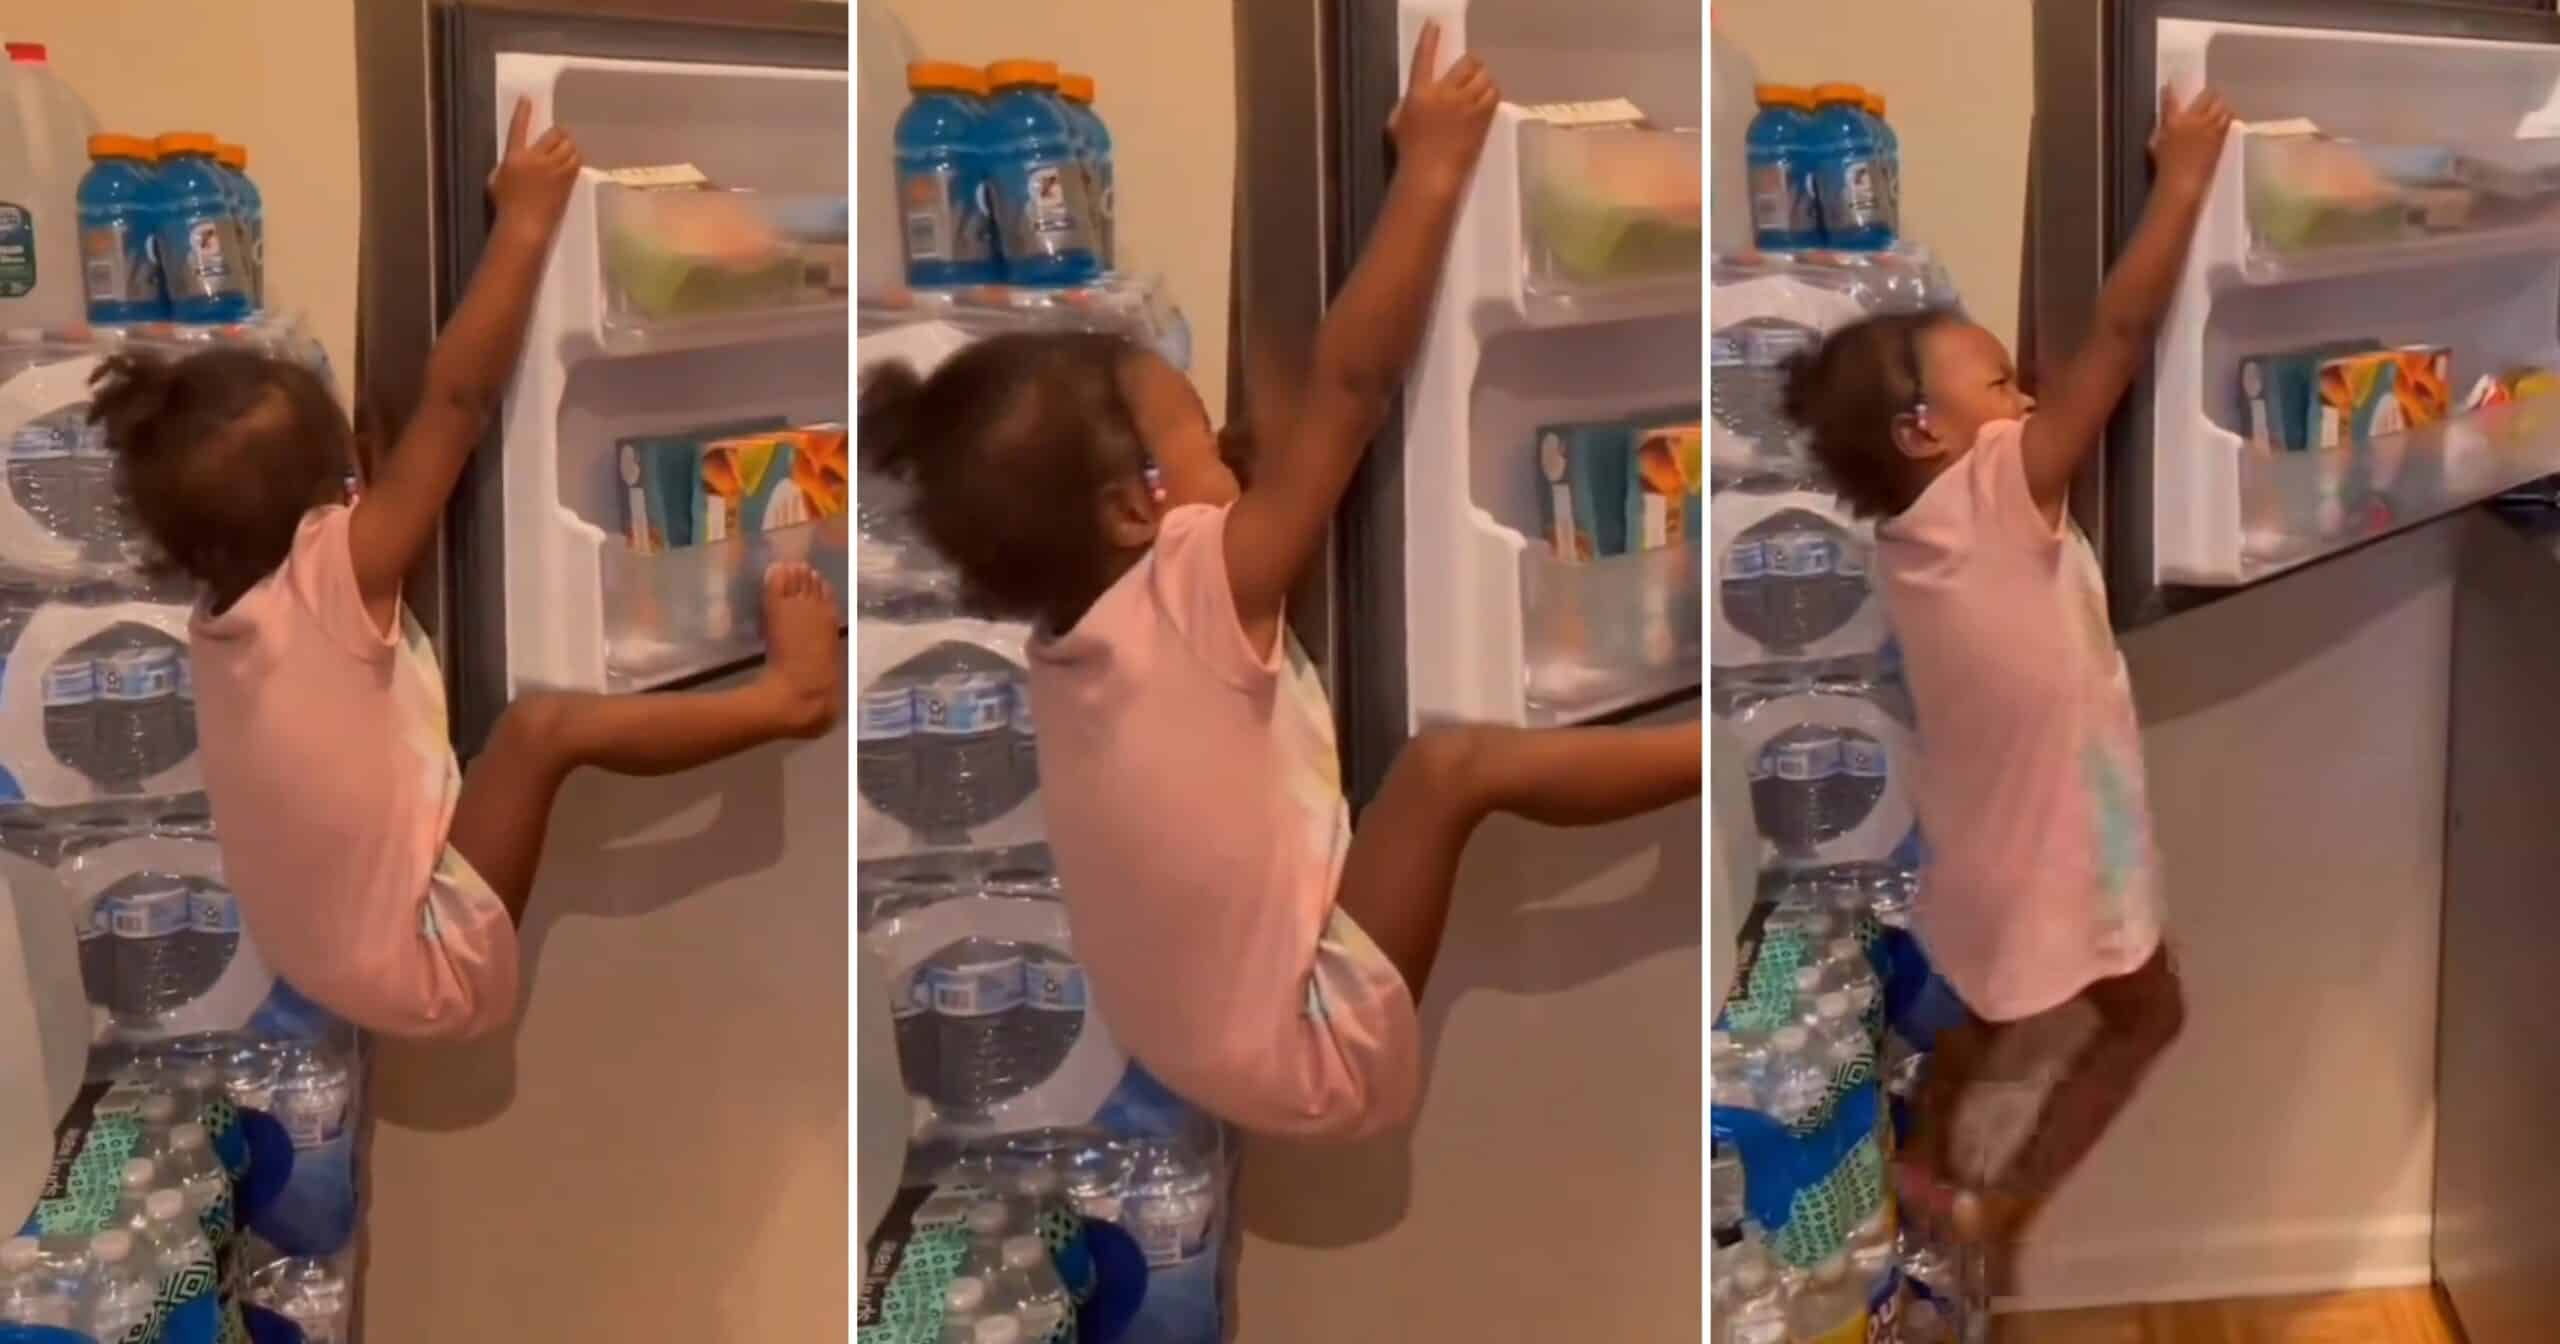 Scary moment a little girl climbed fridge to steal snacks and got stuck (Video)